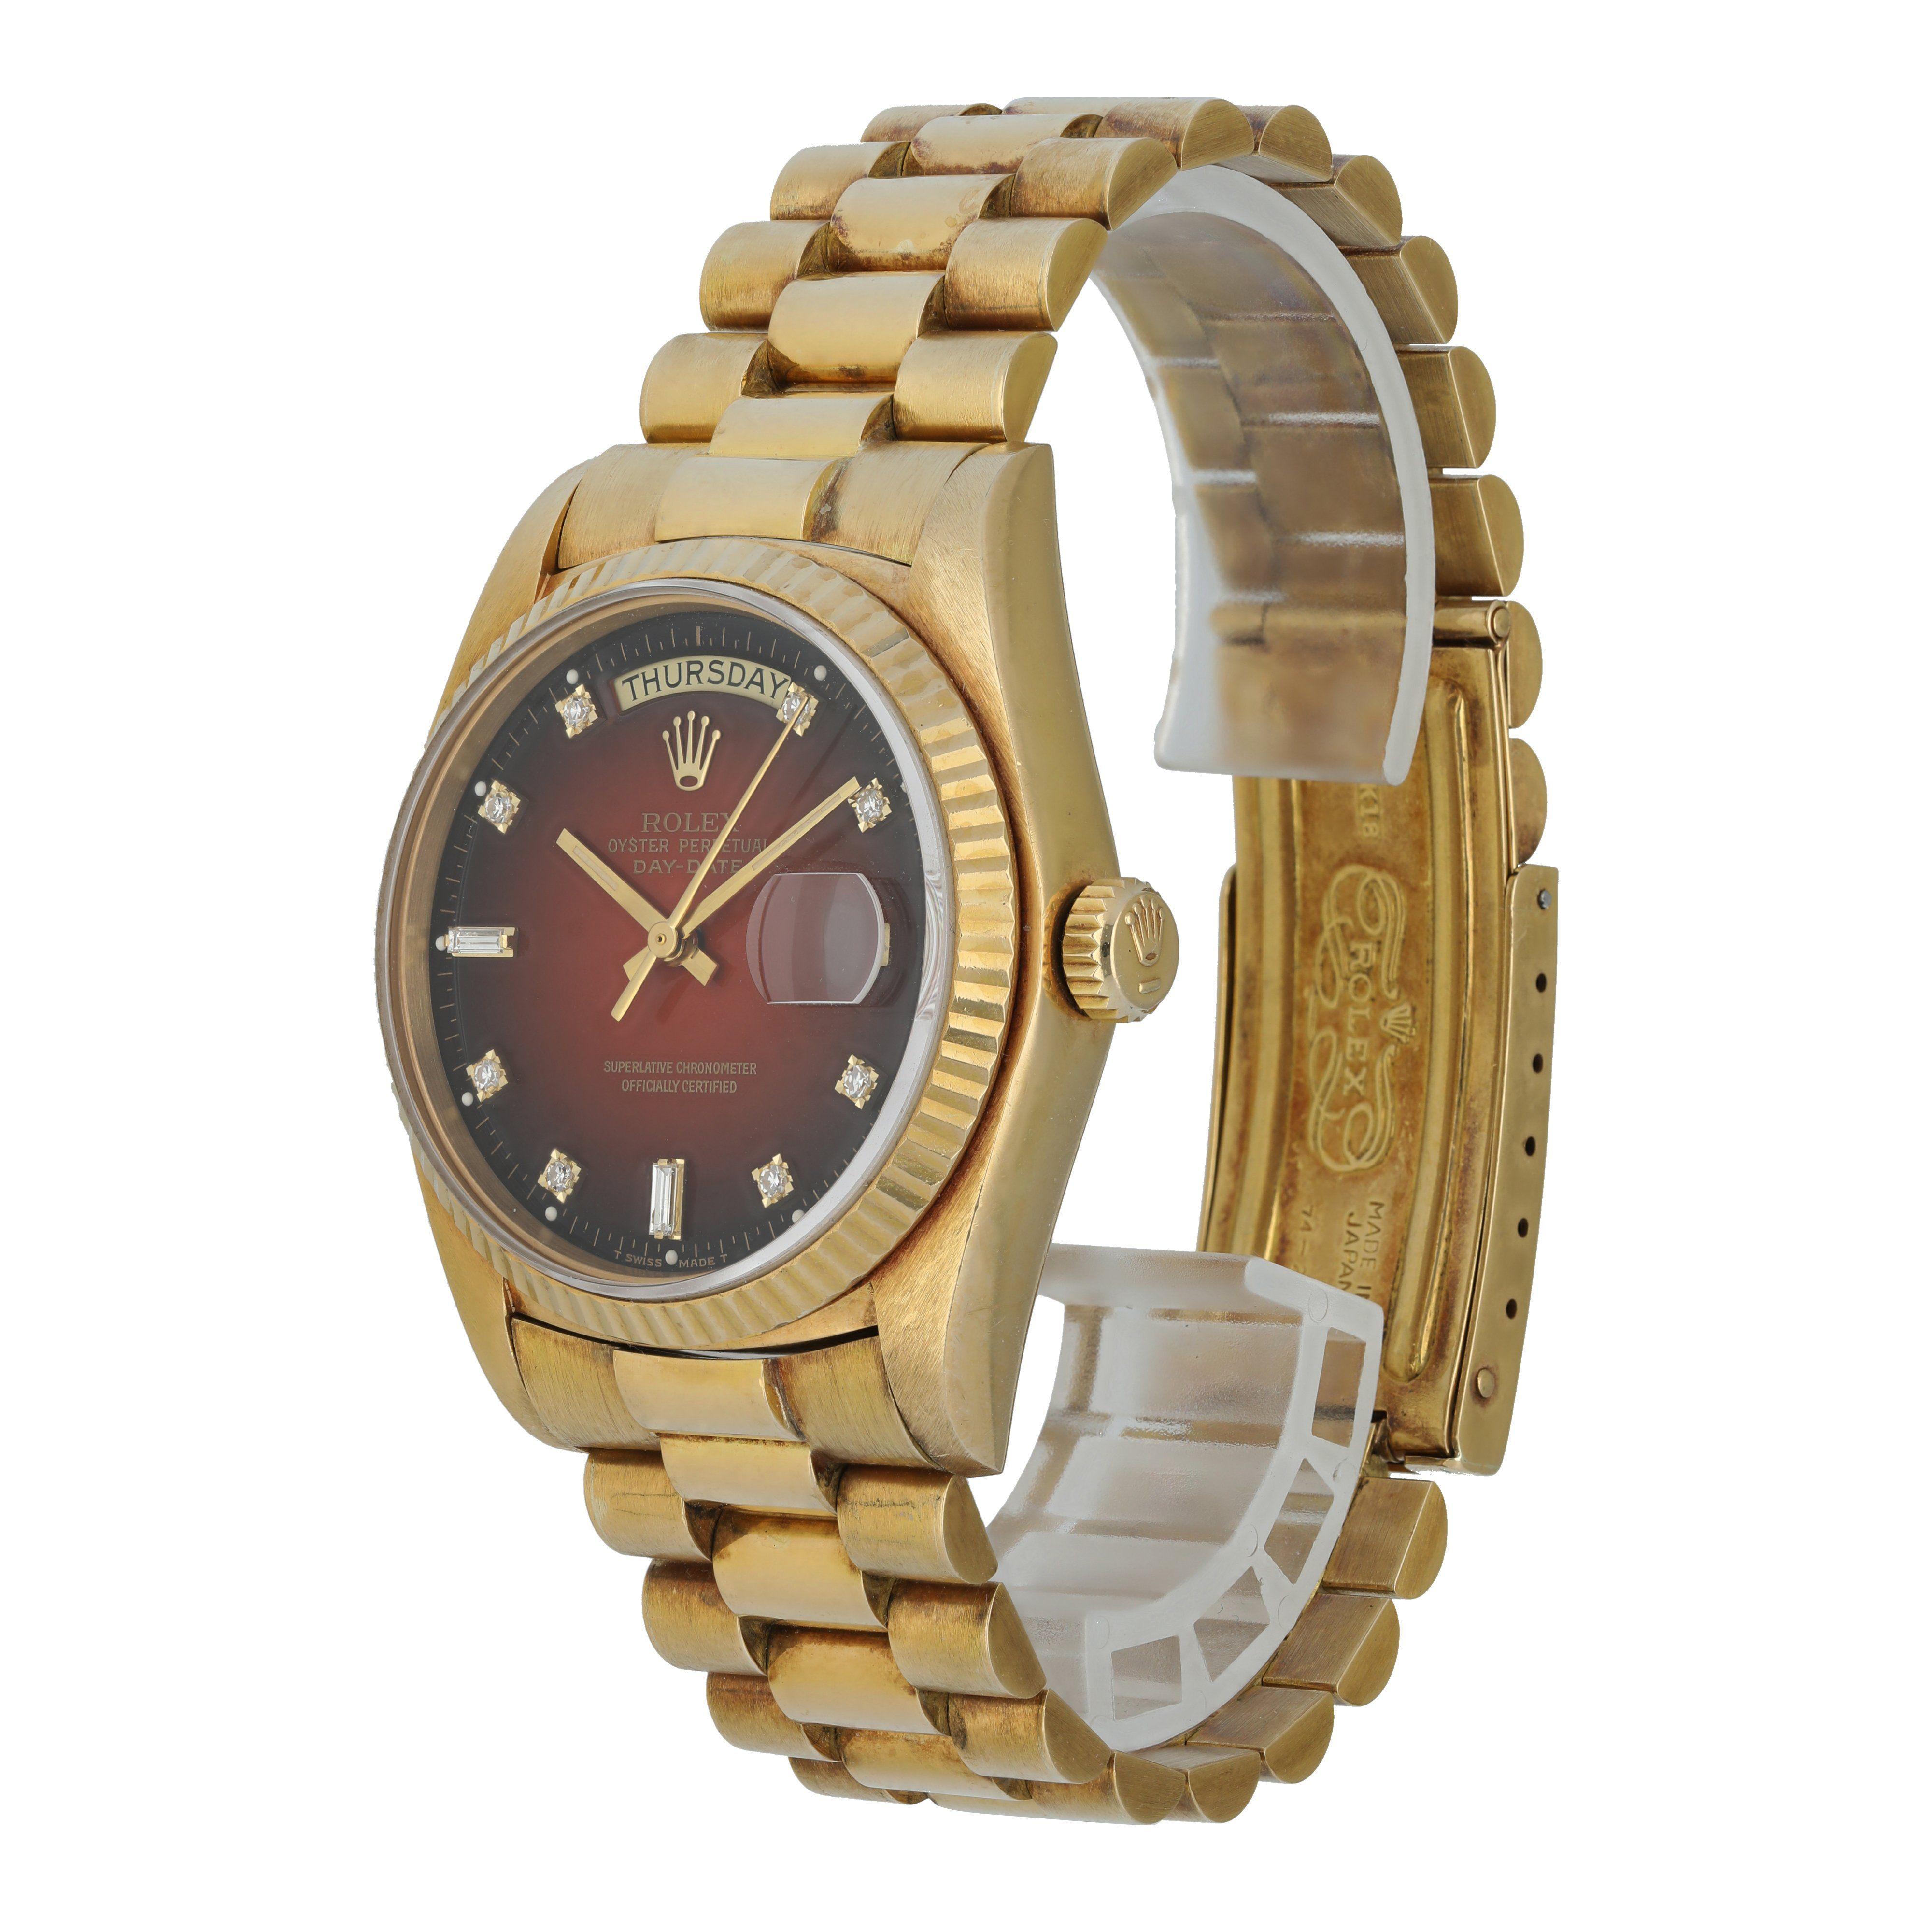 Rolex Day-Date President 18038 men's Watch.
36mm yellow gold case with stationary fluted bezel.
Red Vignette Diamond Dial with gold hands and factory set diamond hour markers.
Date display at the 3 o'clock position.
Day display at the 12 o'clock